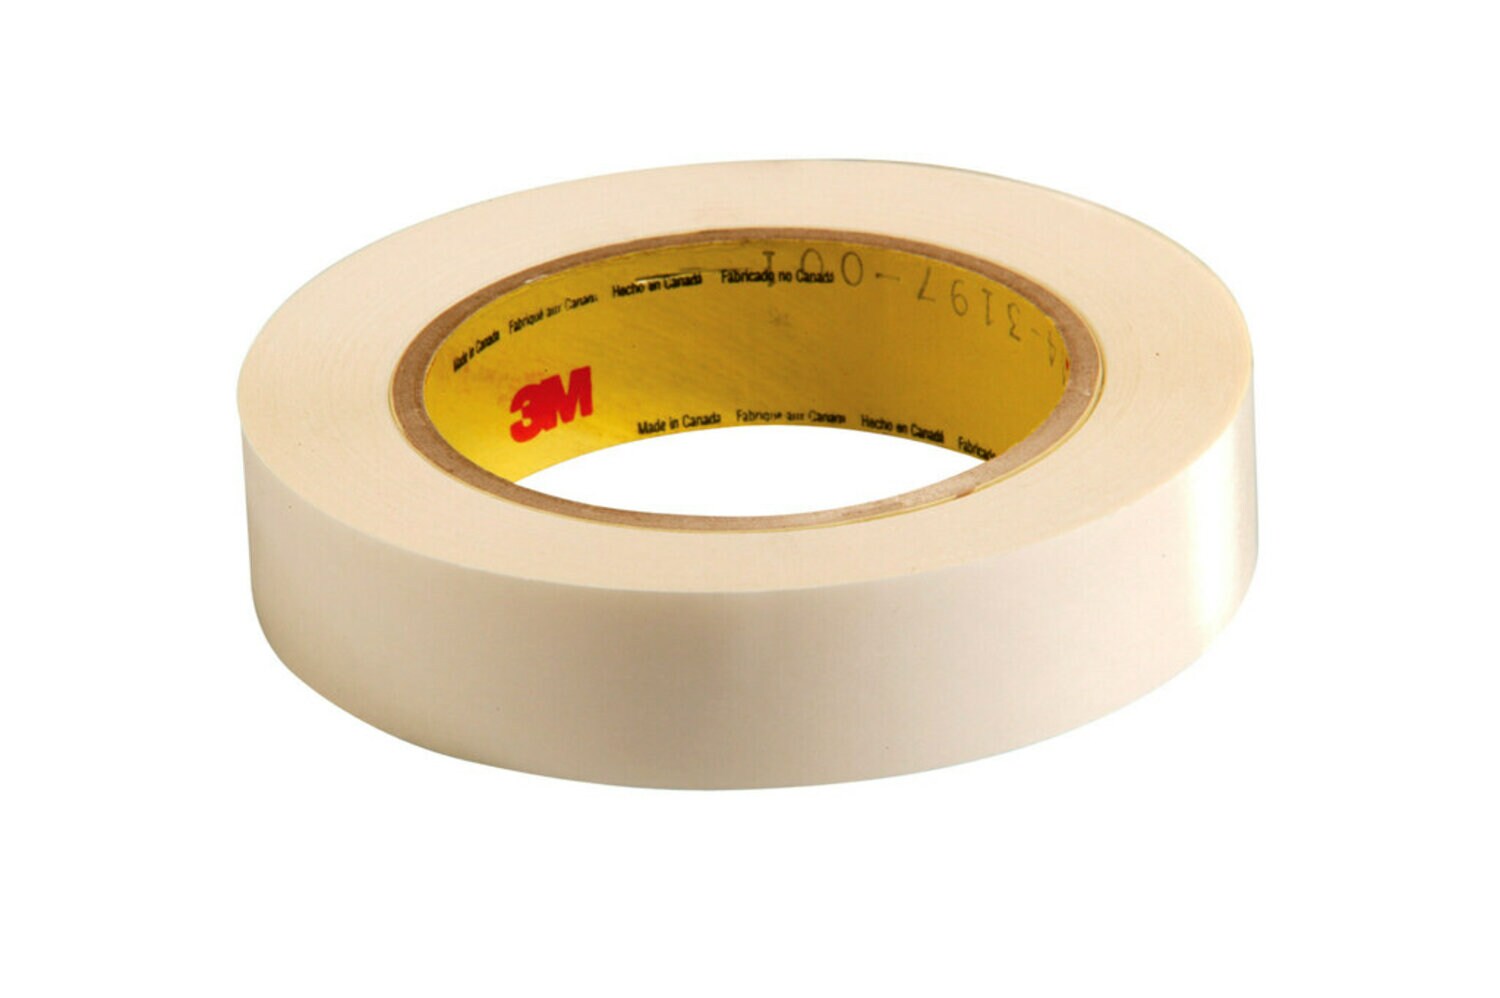 7010335102 - 3M Double Coated Tape 444PC, Clear, 24 in x 36 yd, 3.9 mil, 1 roll per
case